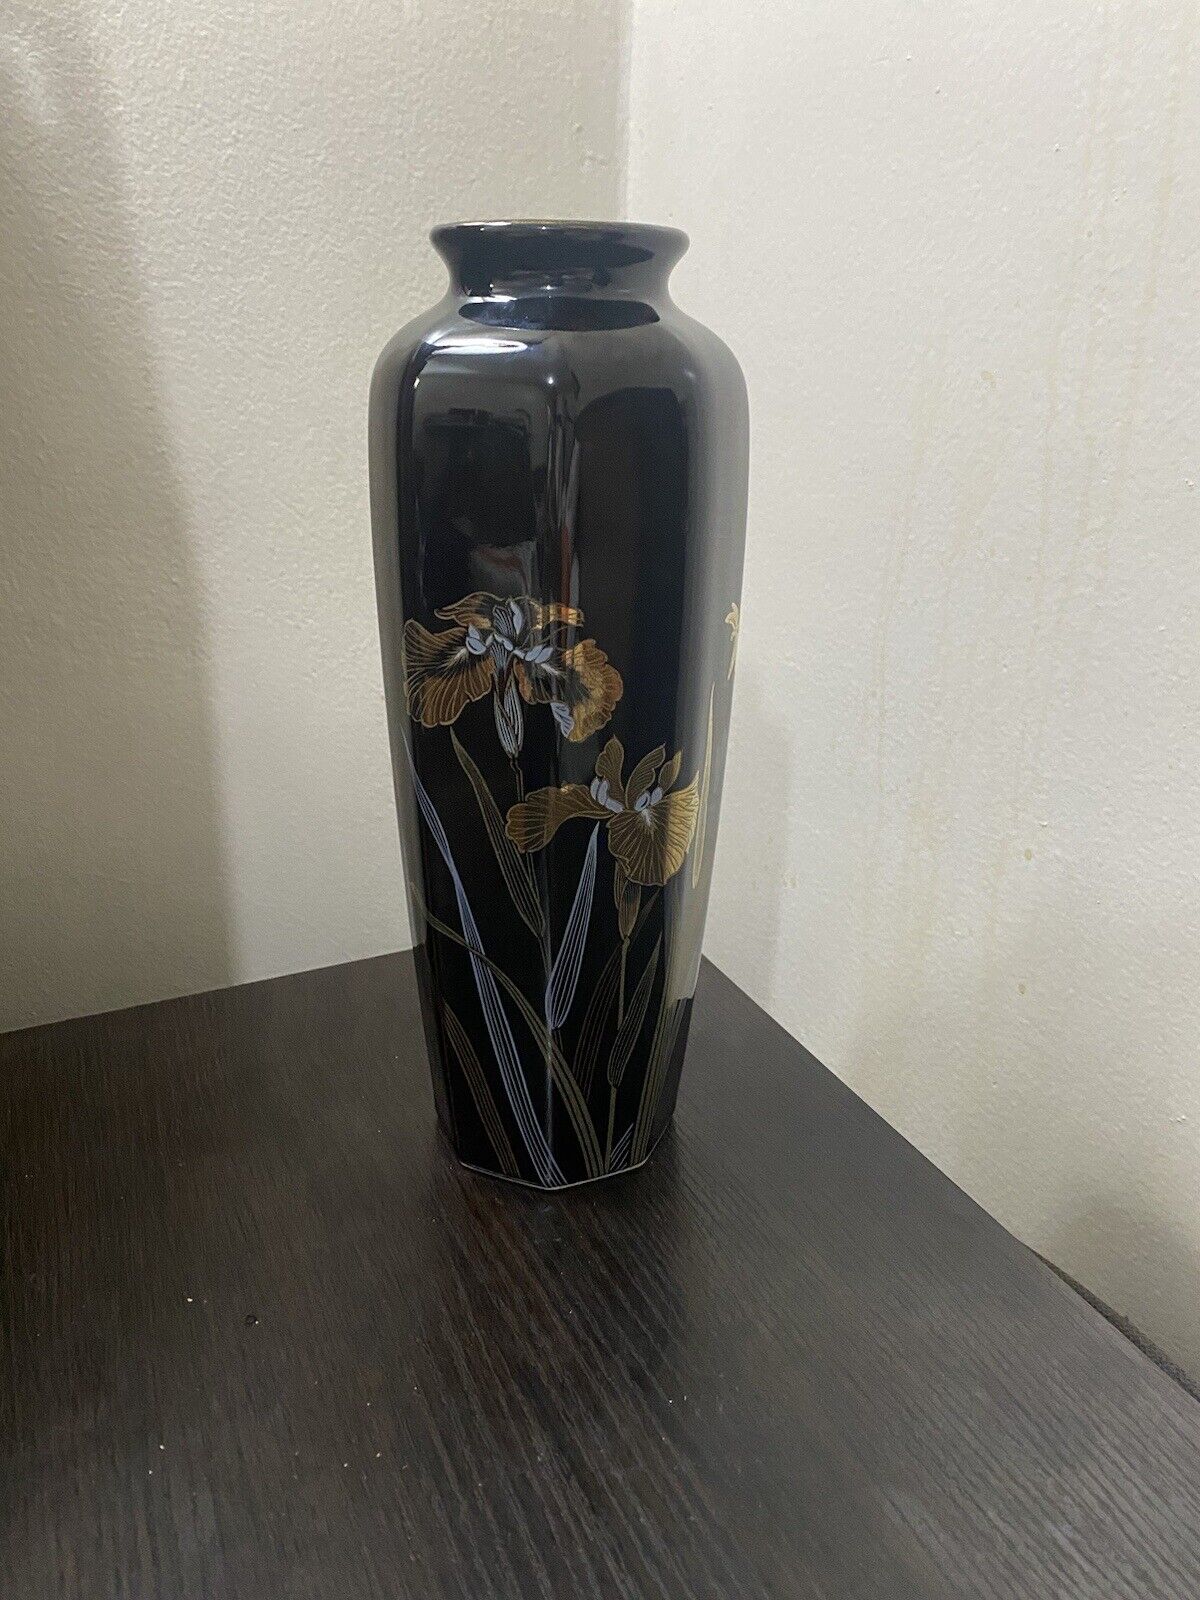 Vintage Japanese Vase Black with Daffodil Design 10.5 in Tall